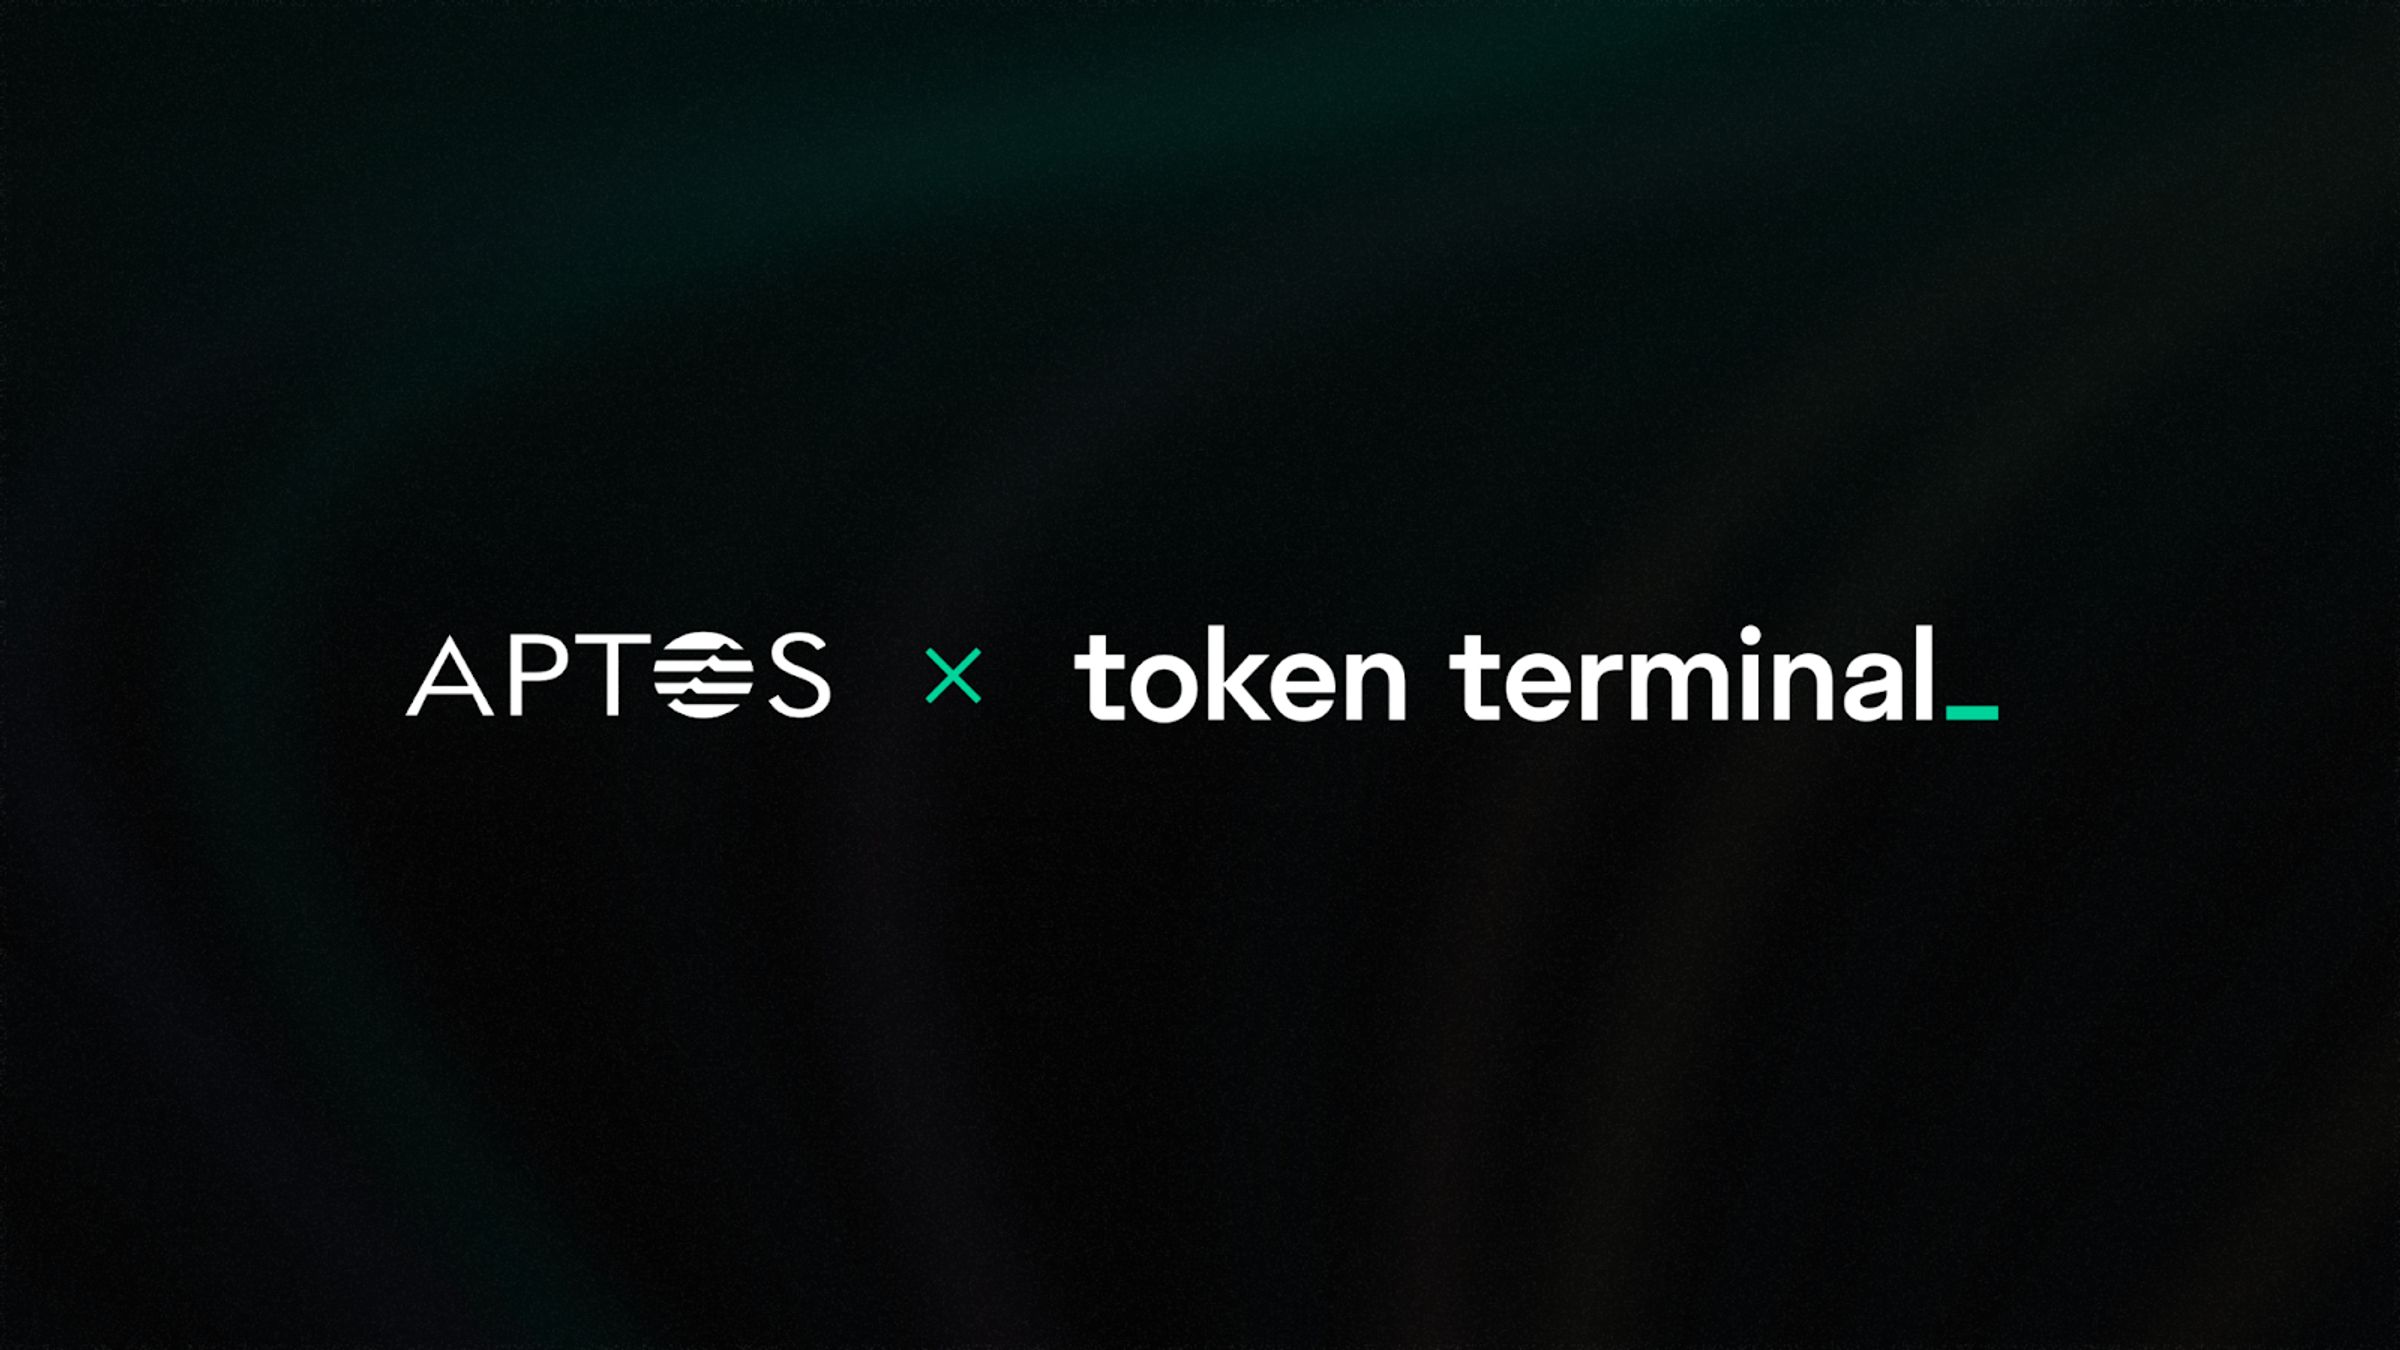 Token Terminal brings Aptos’ onchain data in front of 300,000 institutional customers